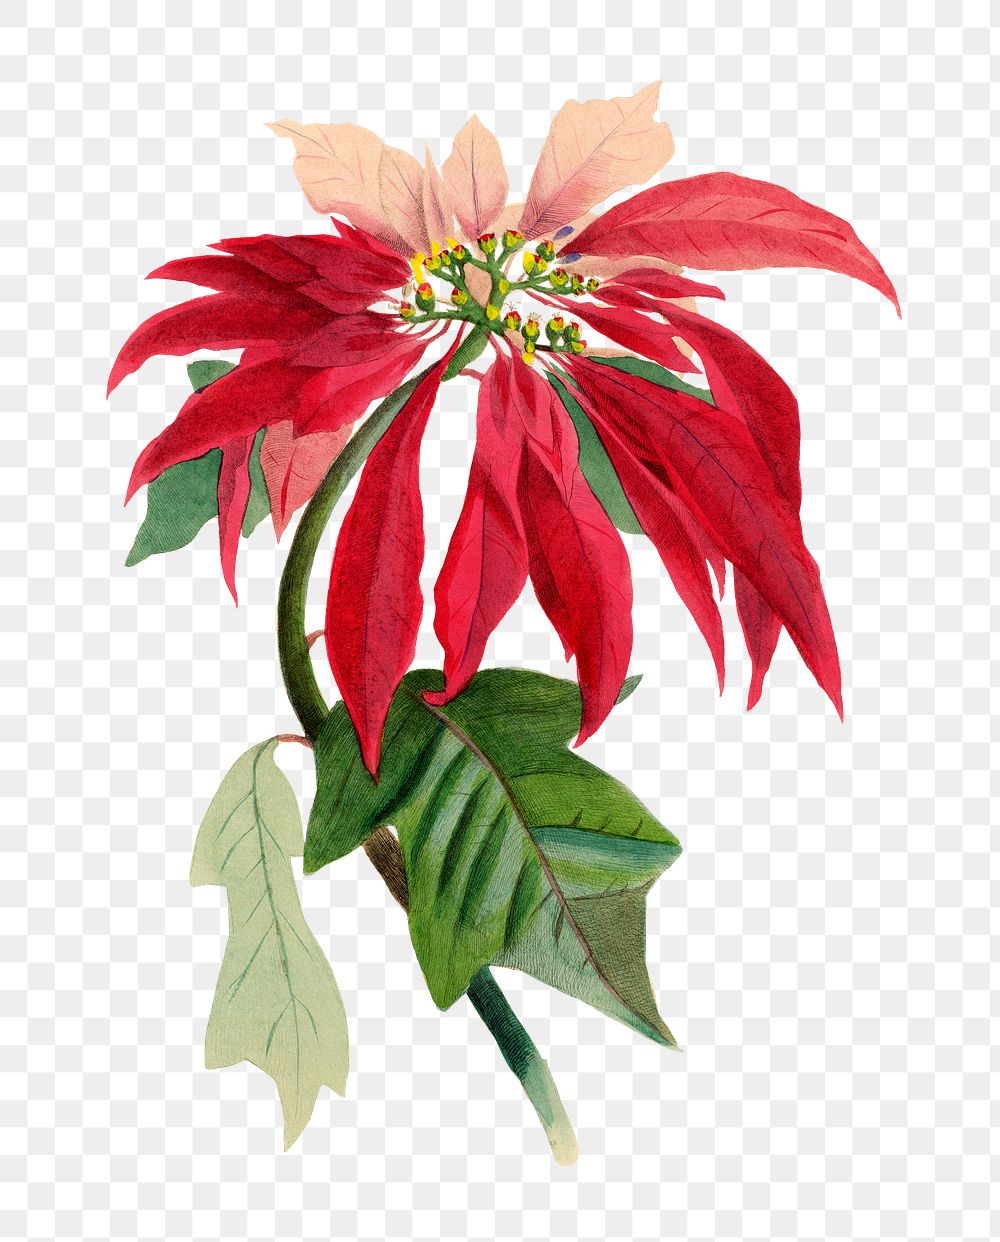 Poinsettia flower png sticker, painting on transparent background